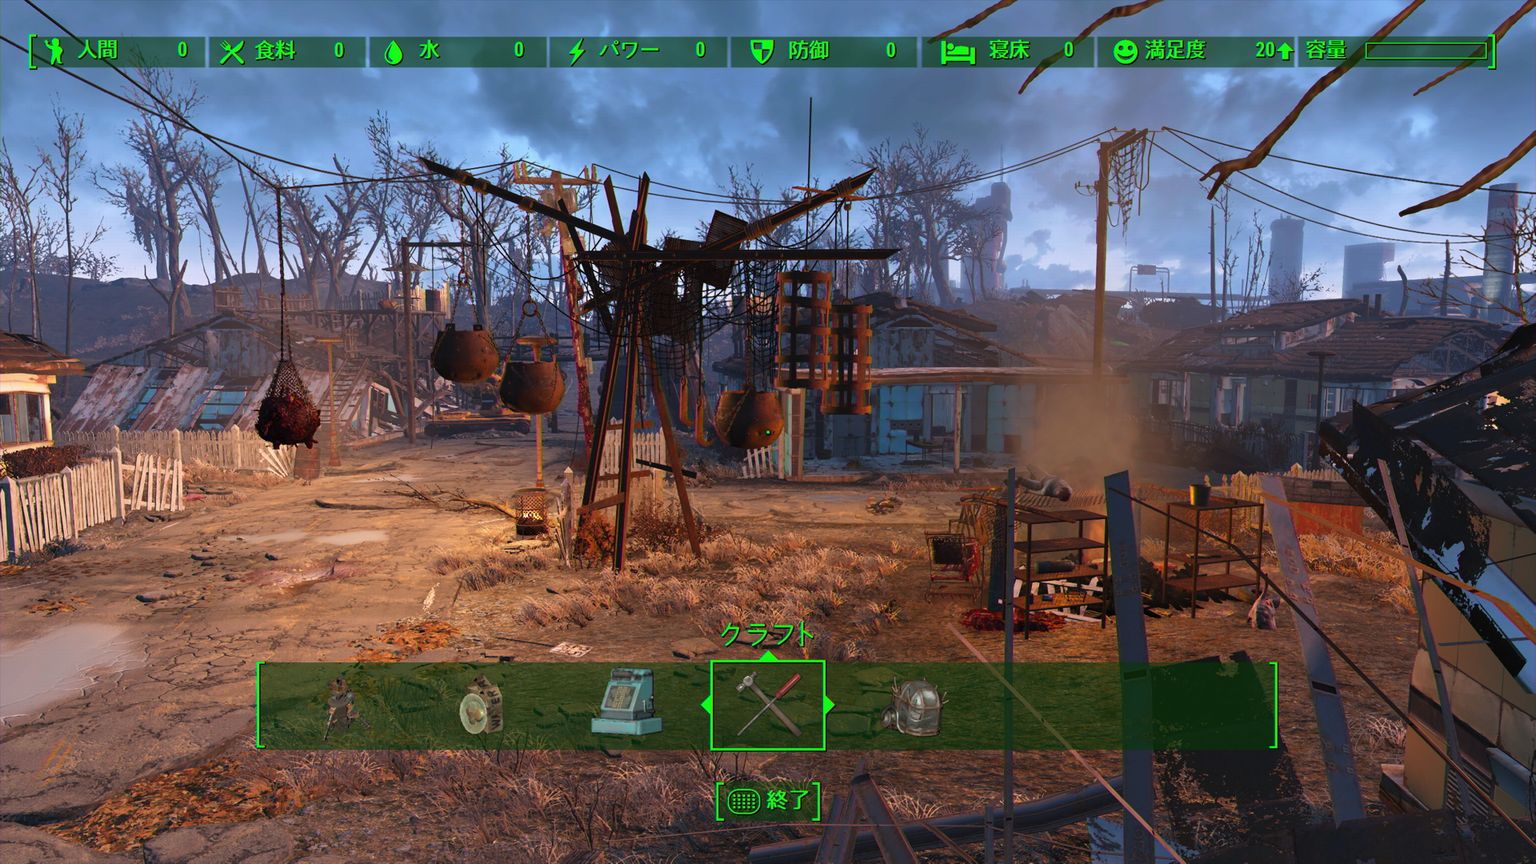 Settlement supplies expanded для fallout 4 фото 29